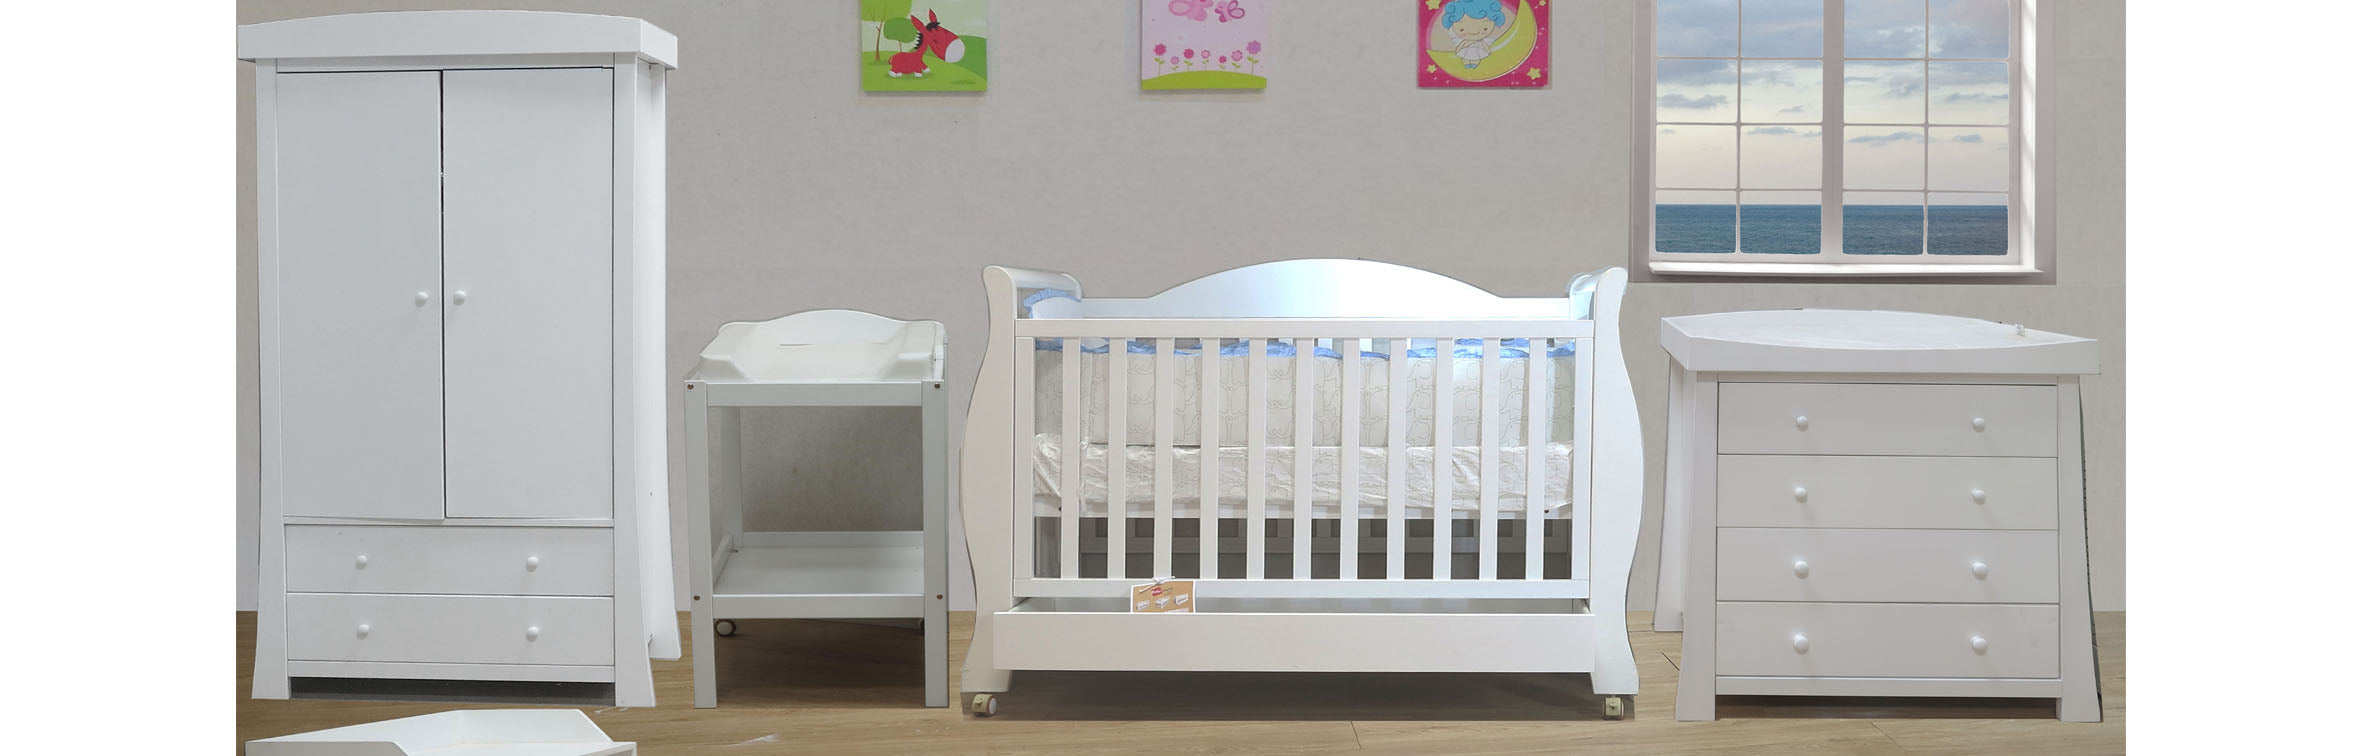 Babyworth Baby Nursery Furniture including sleigh cot with dropside,drawer underneath,wheels.change table with pad,chest of 4 drawers,robe with drawers,bamboo mattress,baby bedding set,wall decor picture deal package at wholesale price match other shops.